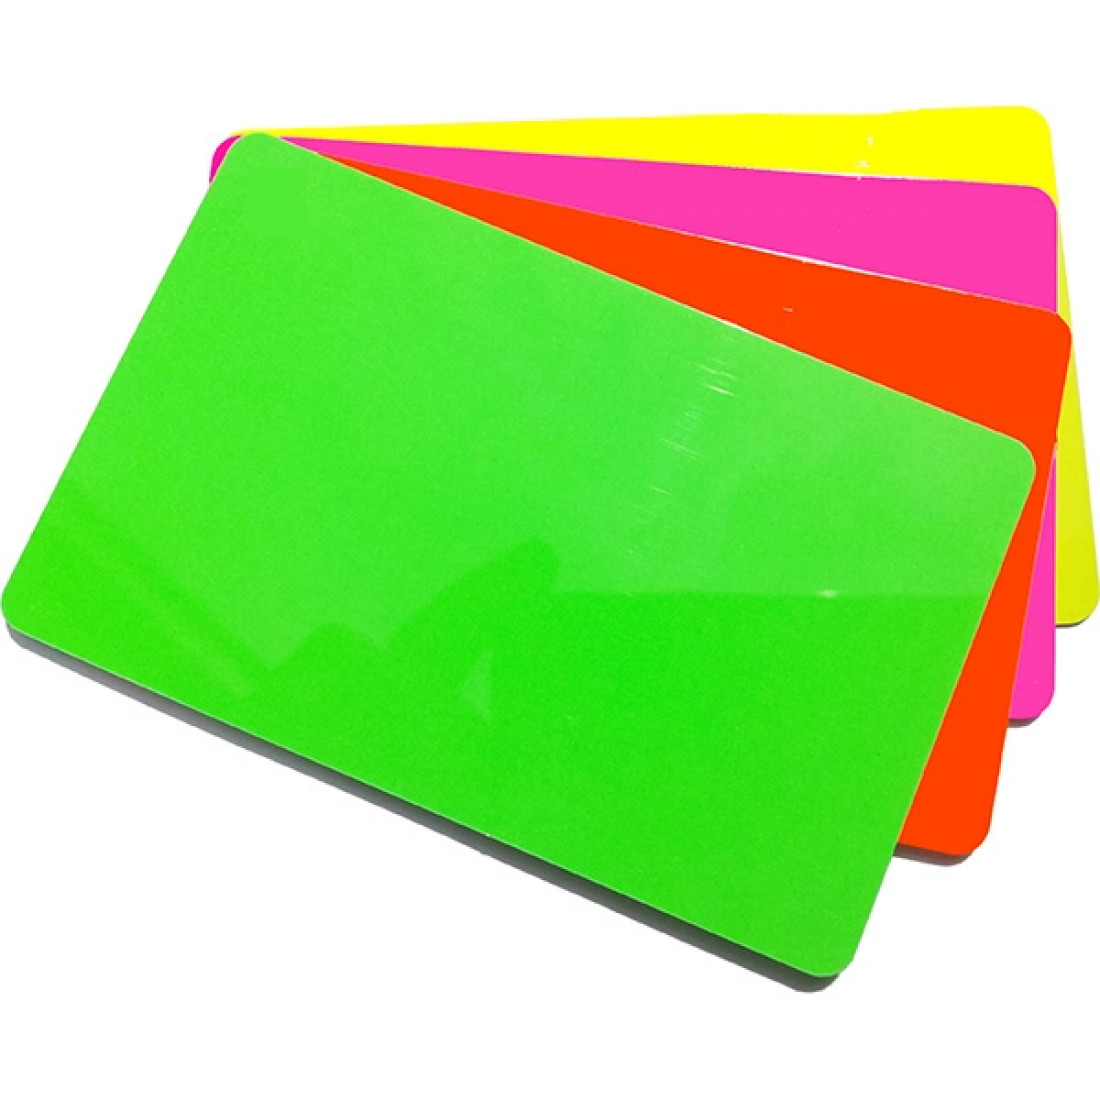 Fluorescent Pvc Cards 500 Pack Credit Card Size 2800